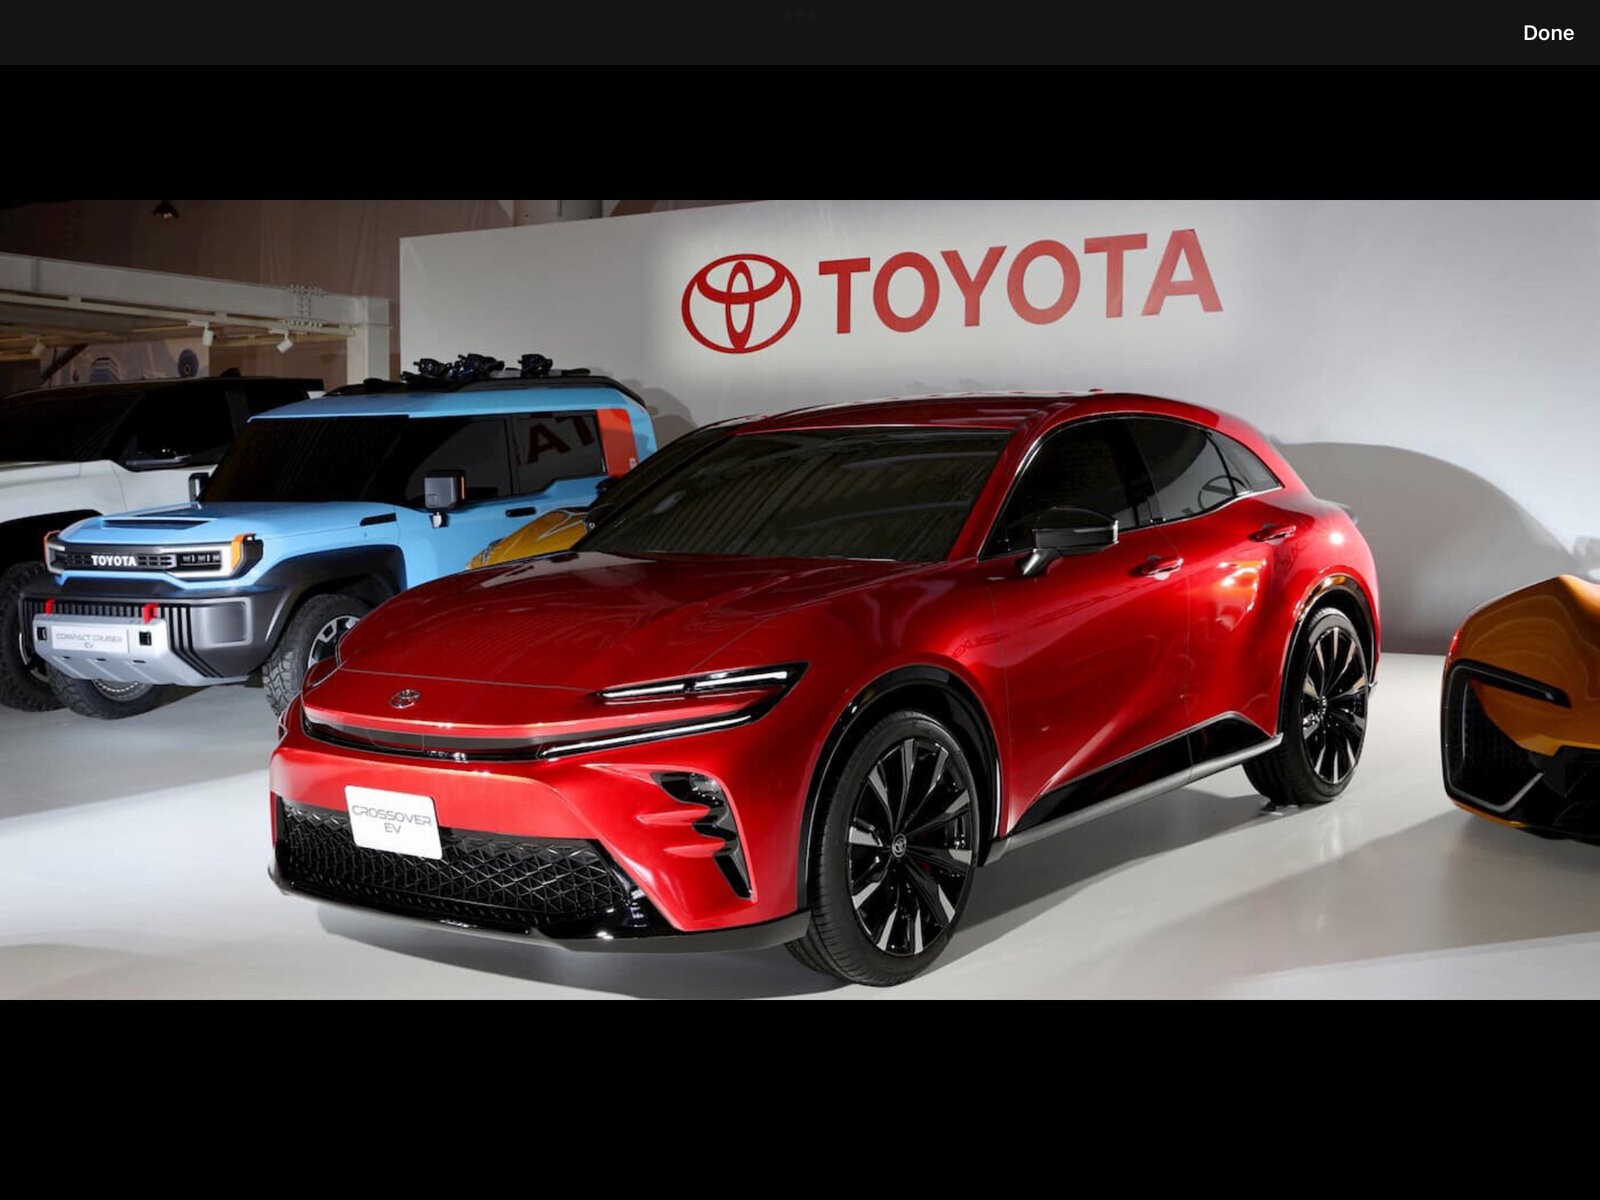 Toyota promises new EVs coming in 2026 with nearly 500 miles of range.jpg